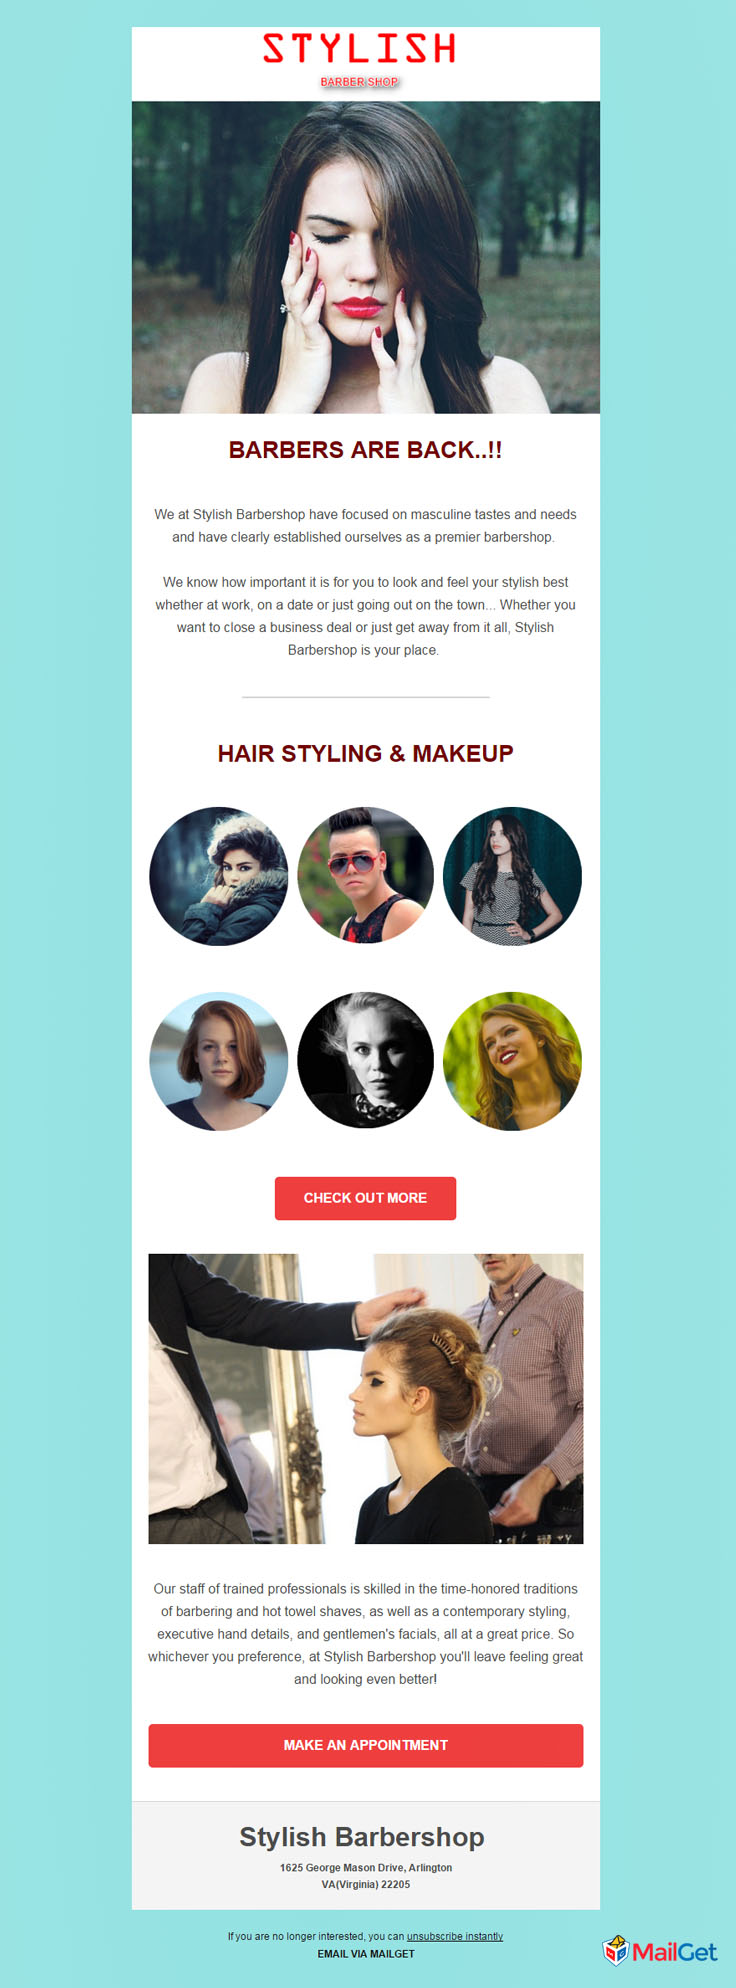 free-hair-salon-email-newsletter-templates-4-MailGet